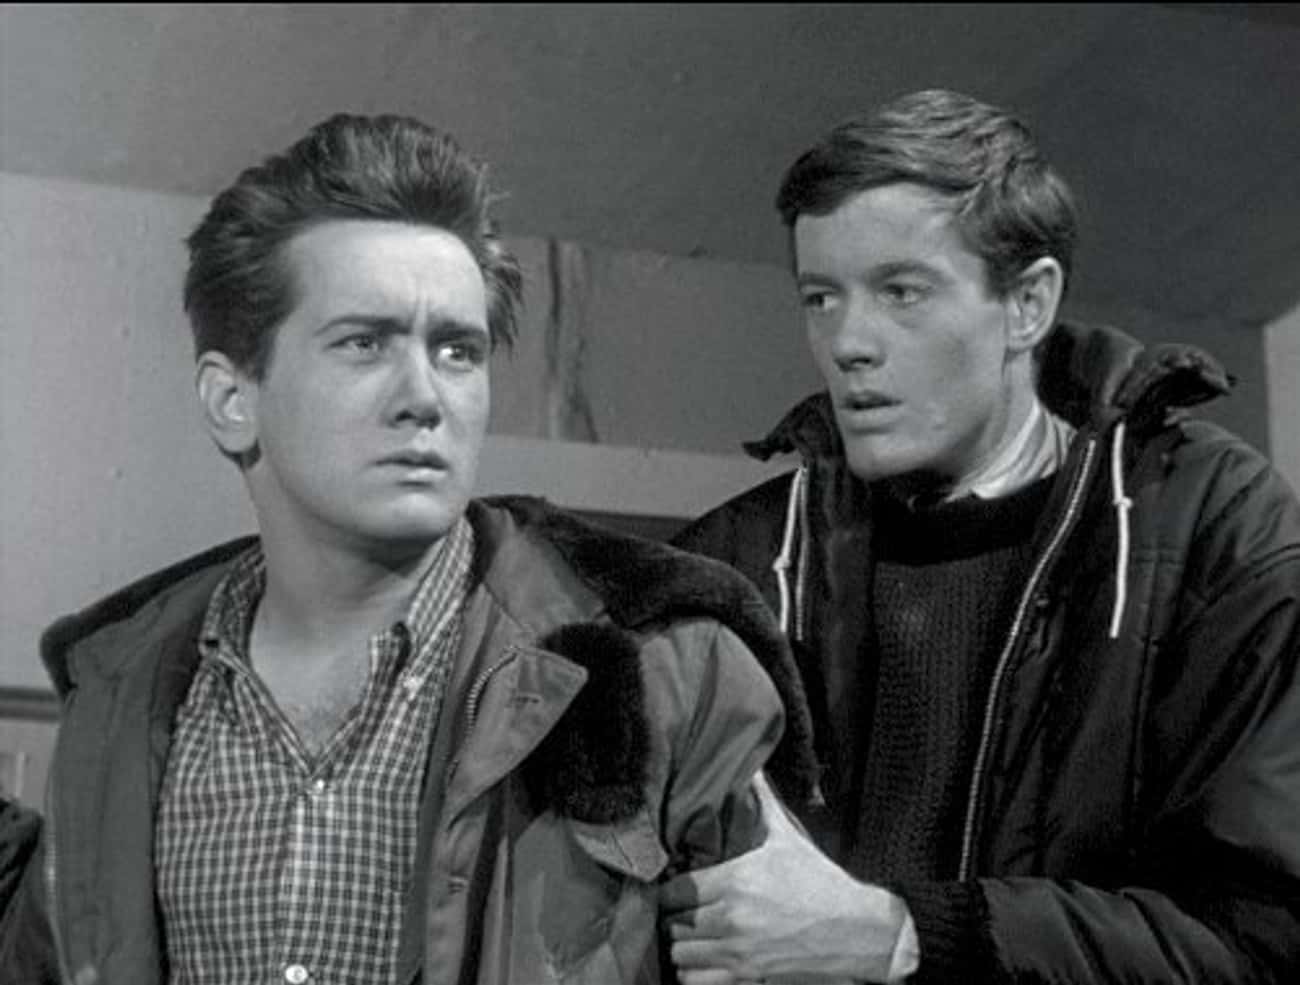 Young Martin Sheen in Checkered Buttondown and Coat